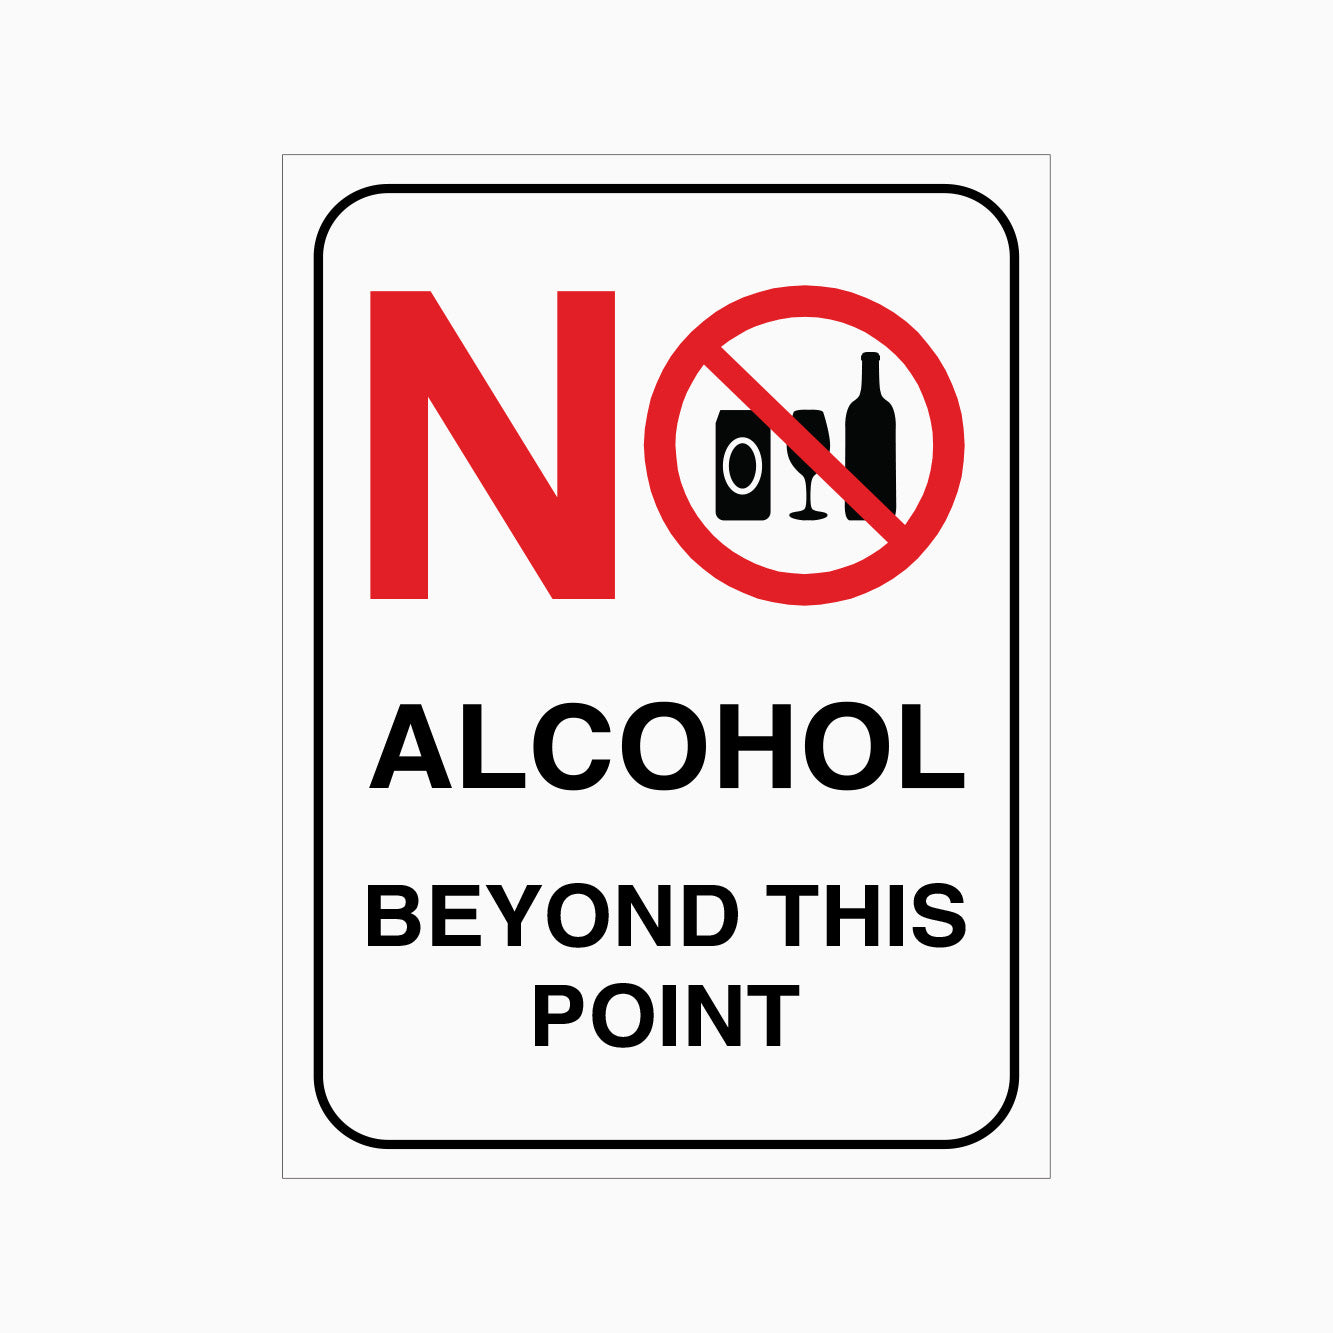 NO ALCOHOL BEYOND THIS POINT SIGN